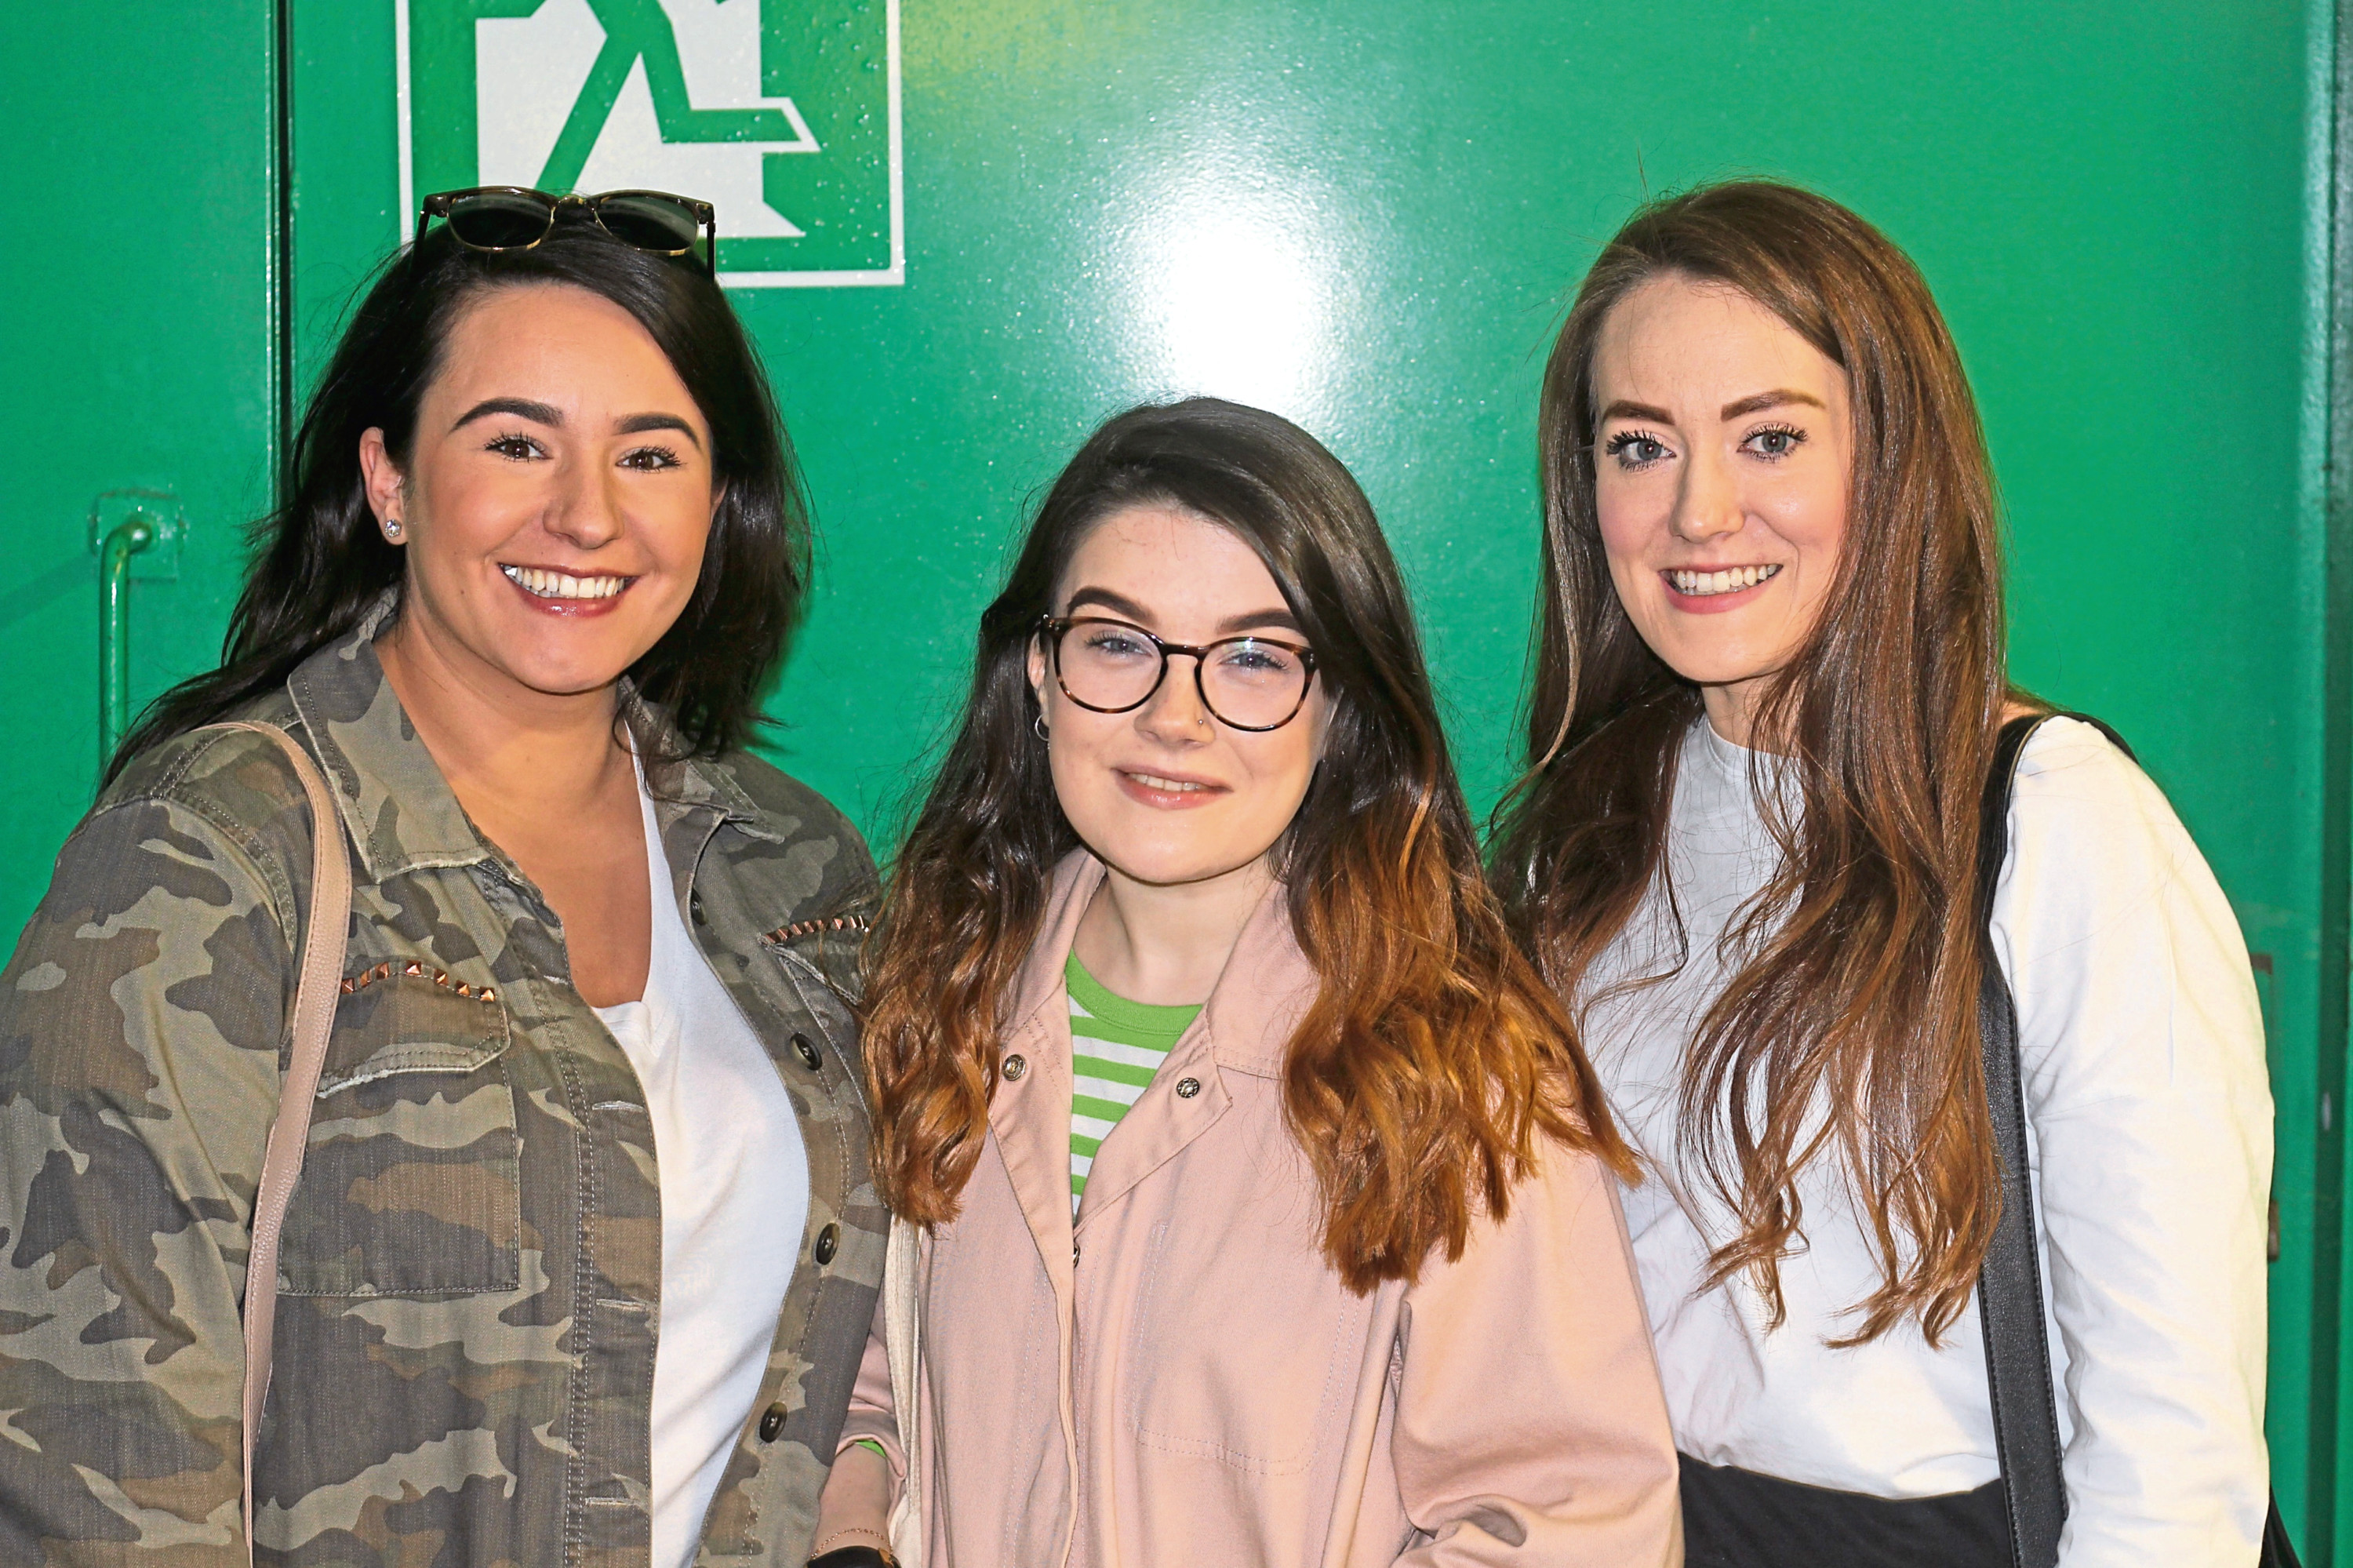 Orlaith Duffy, Erin Slaven and Mikaela McKinley from the On the Ball campaign have welcomed the news that free period products will be offered to female fans at this year's Solheim Cup.